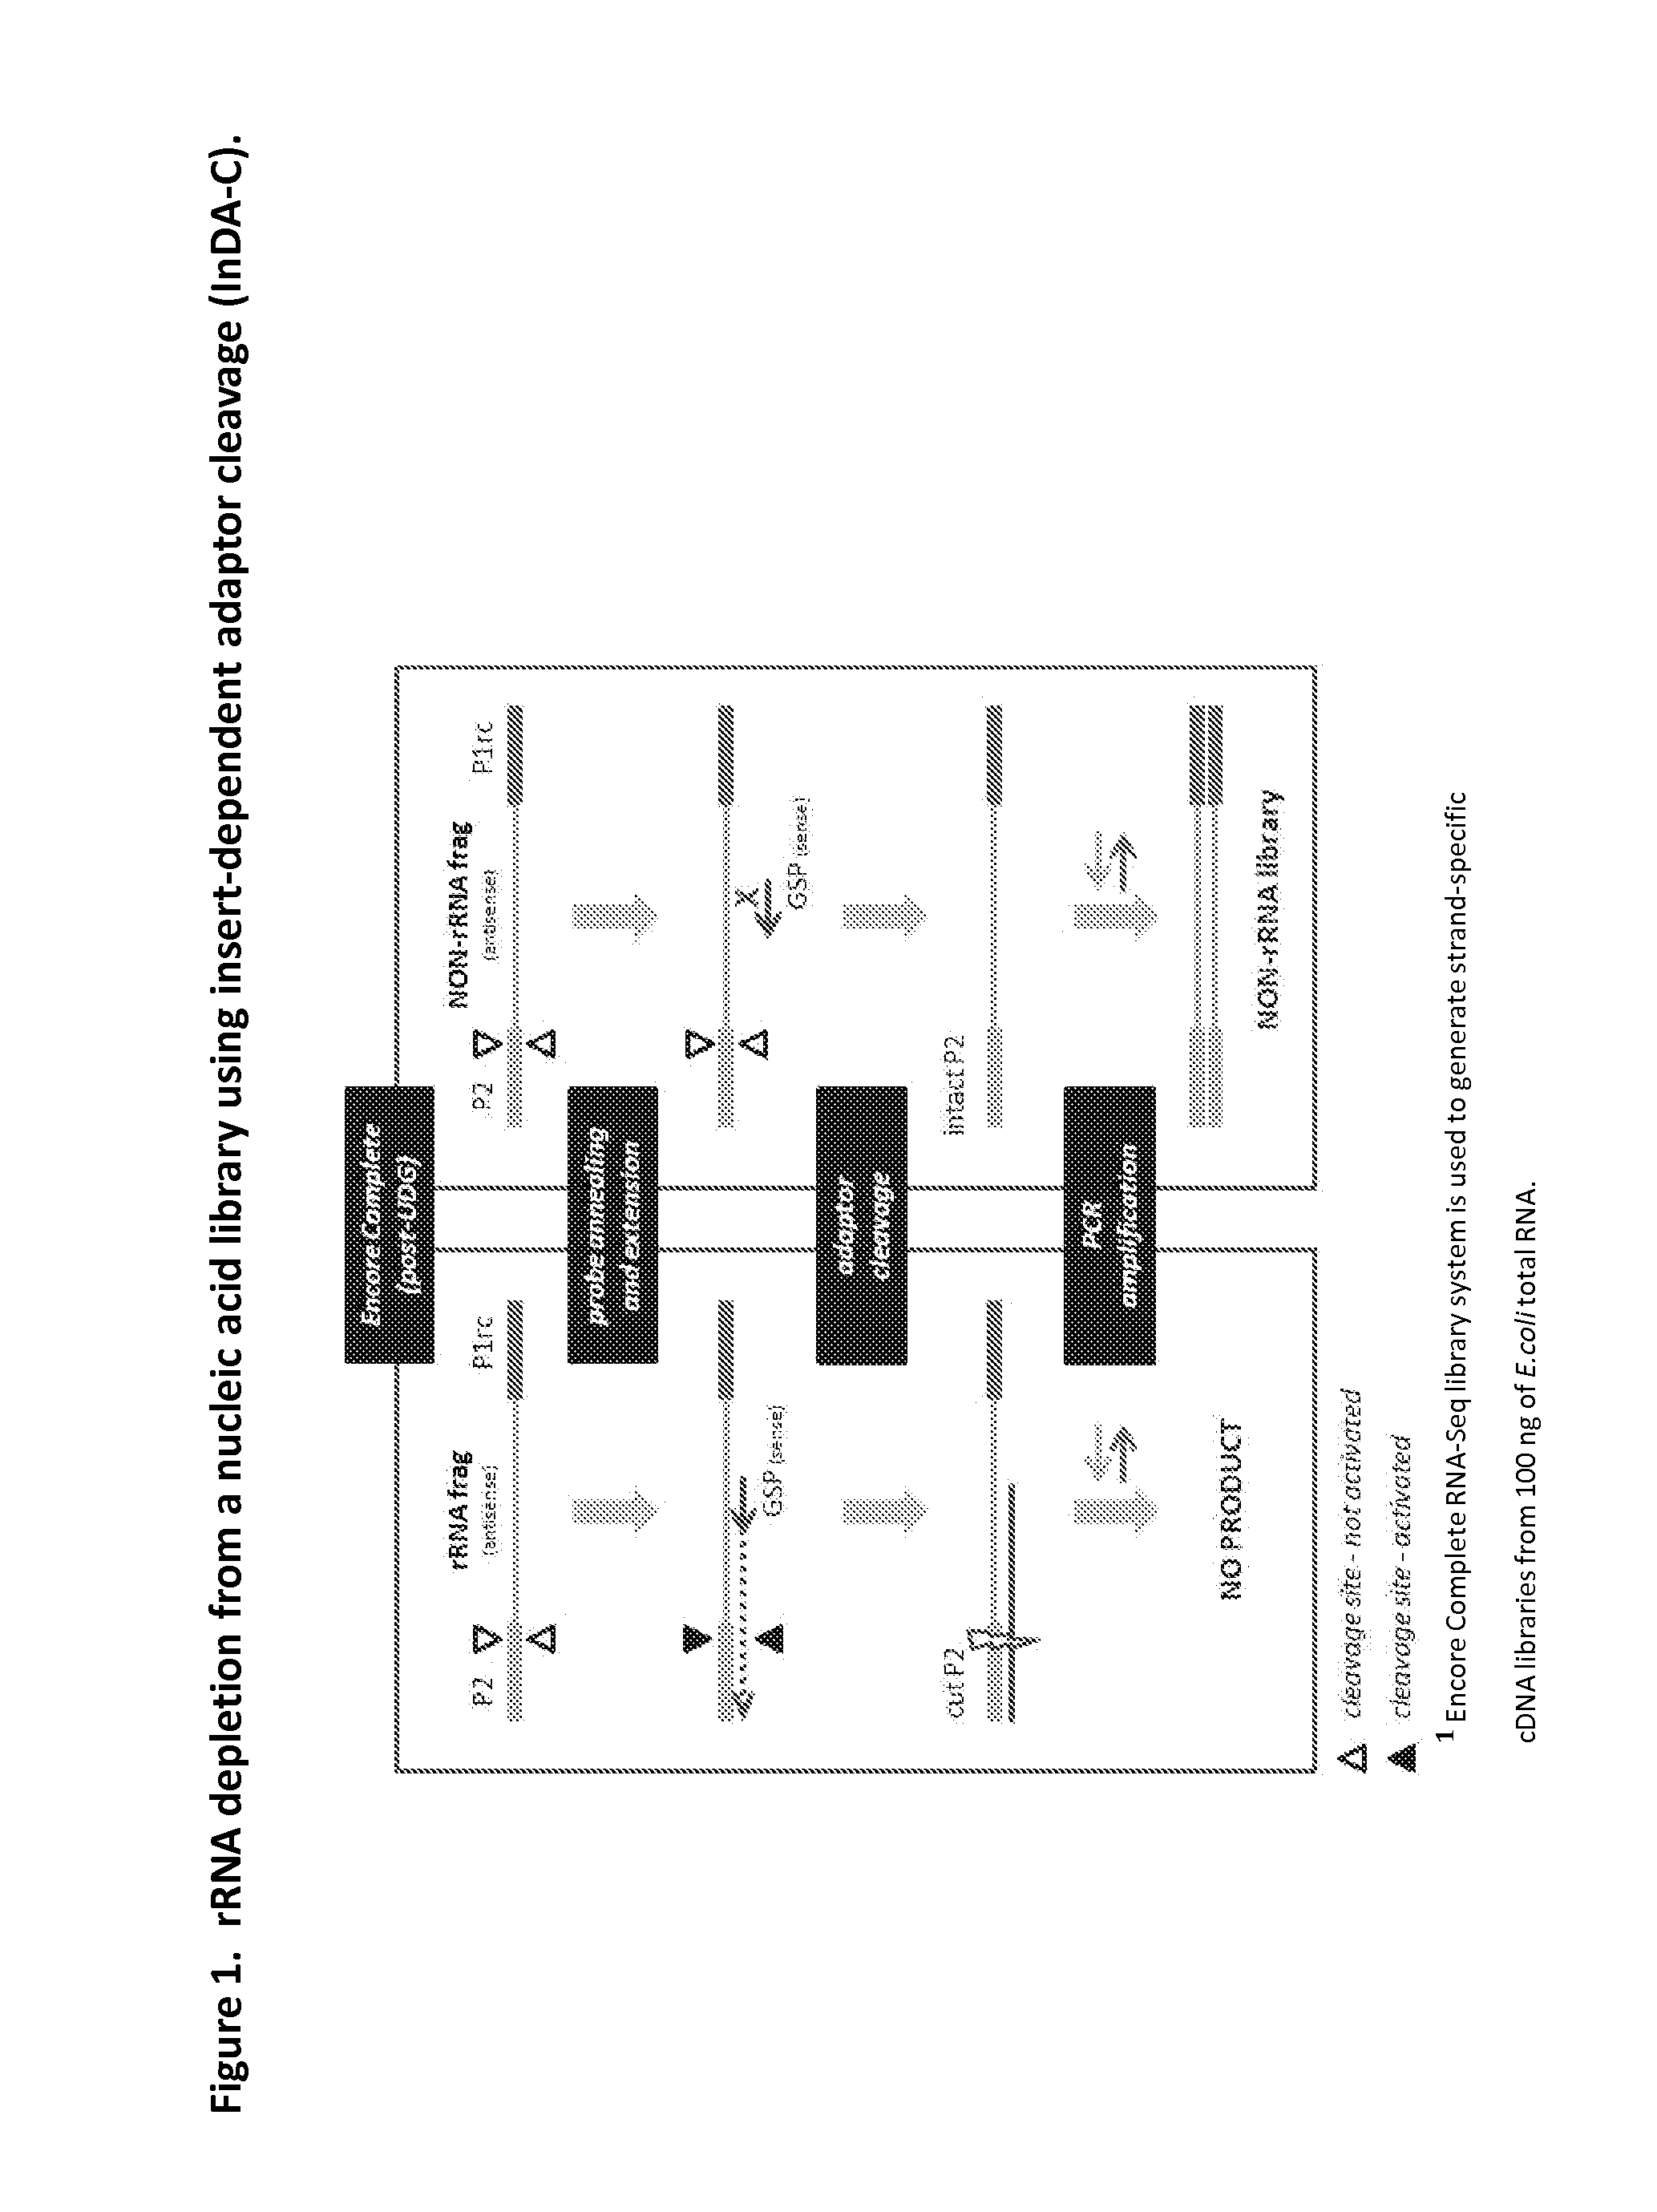 Compositions and methods for negative selection of non-desired nucleic acid sequences